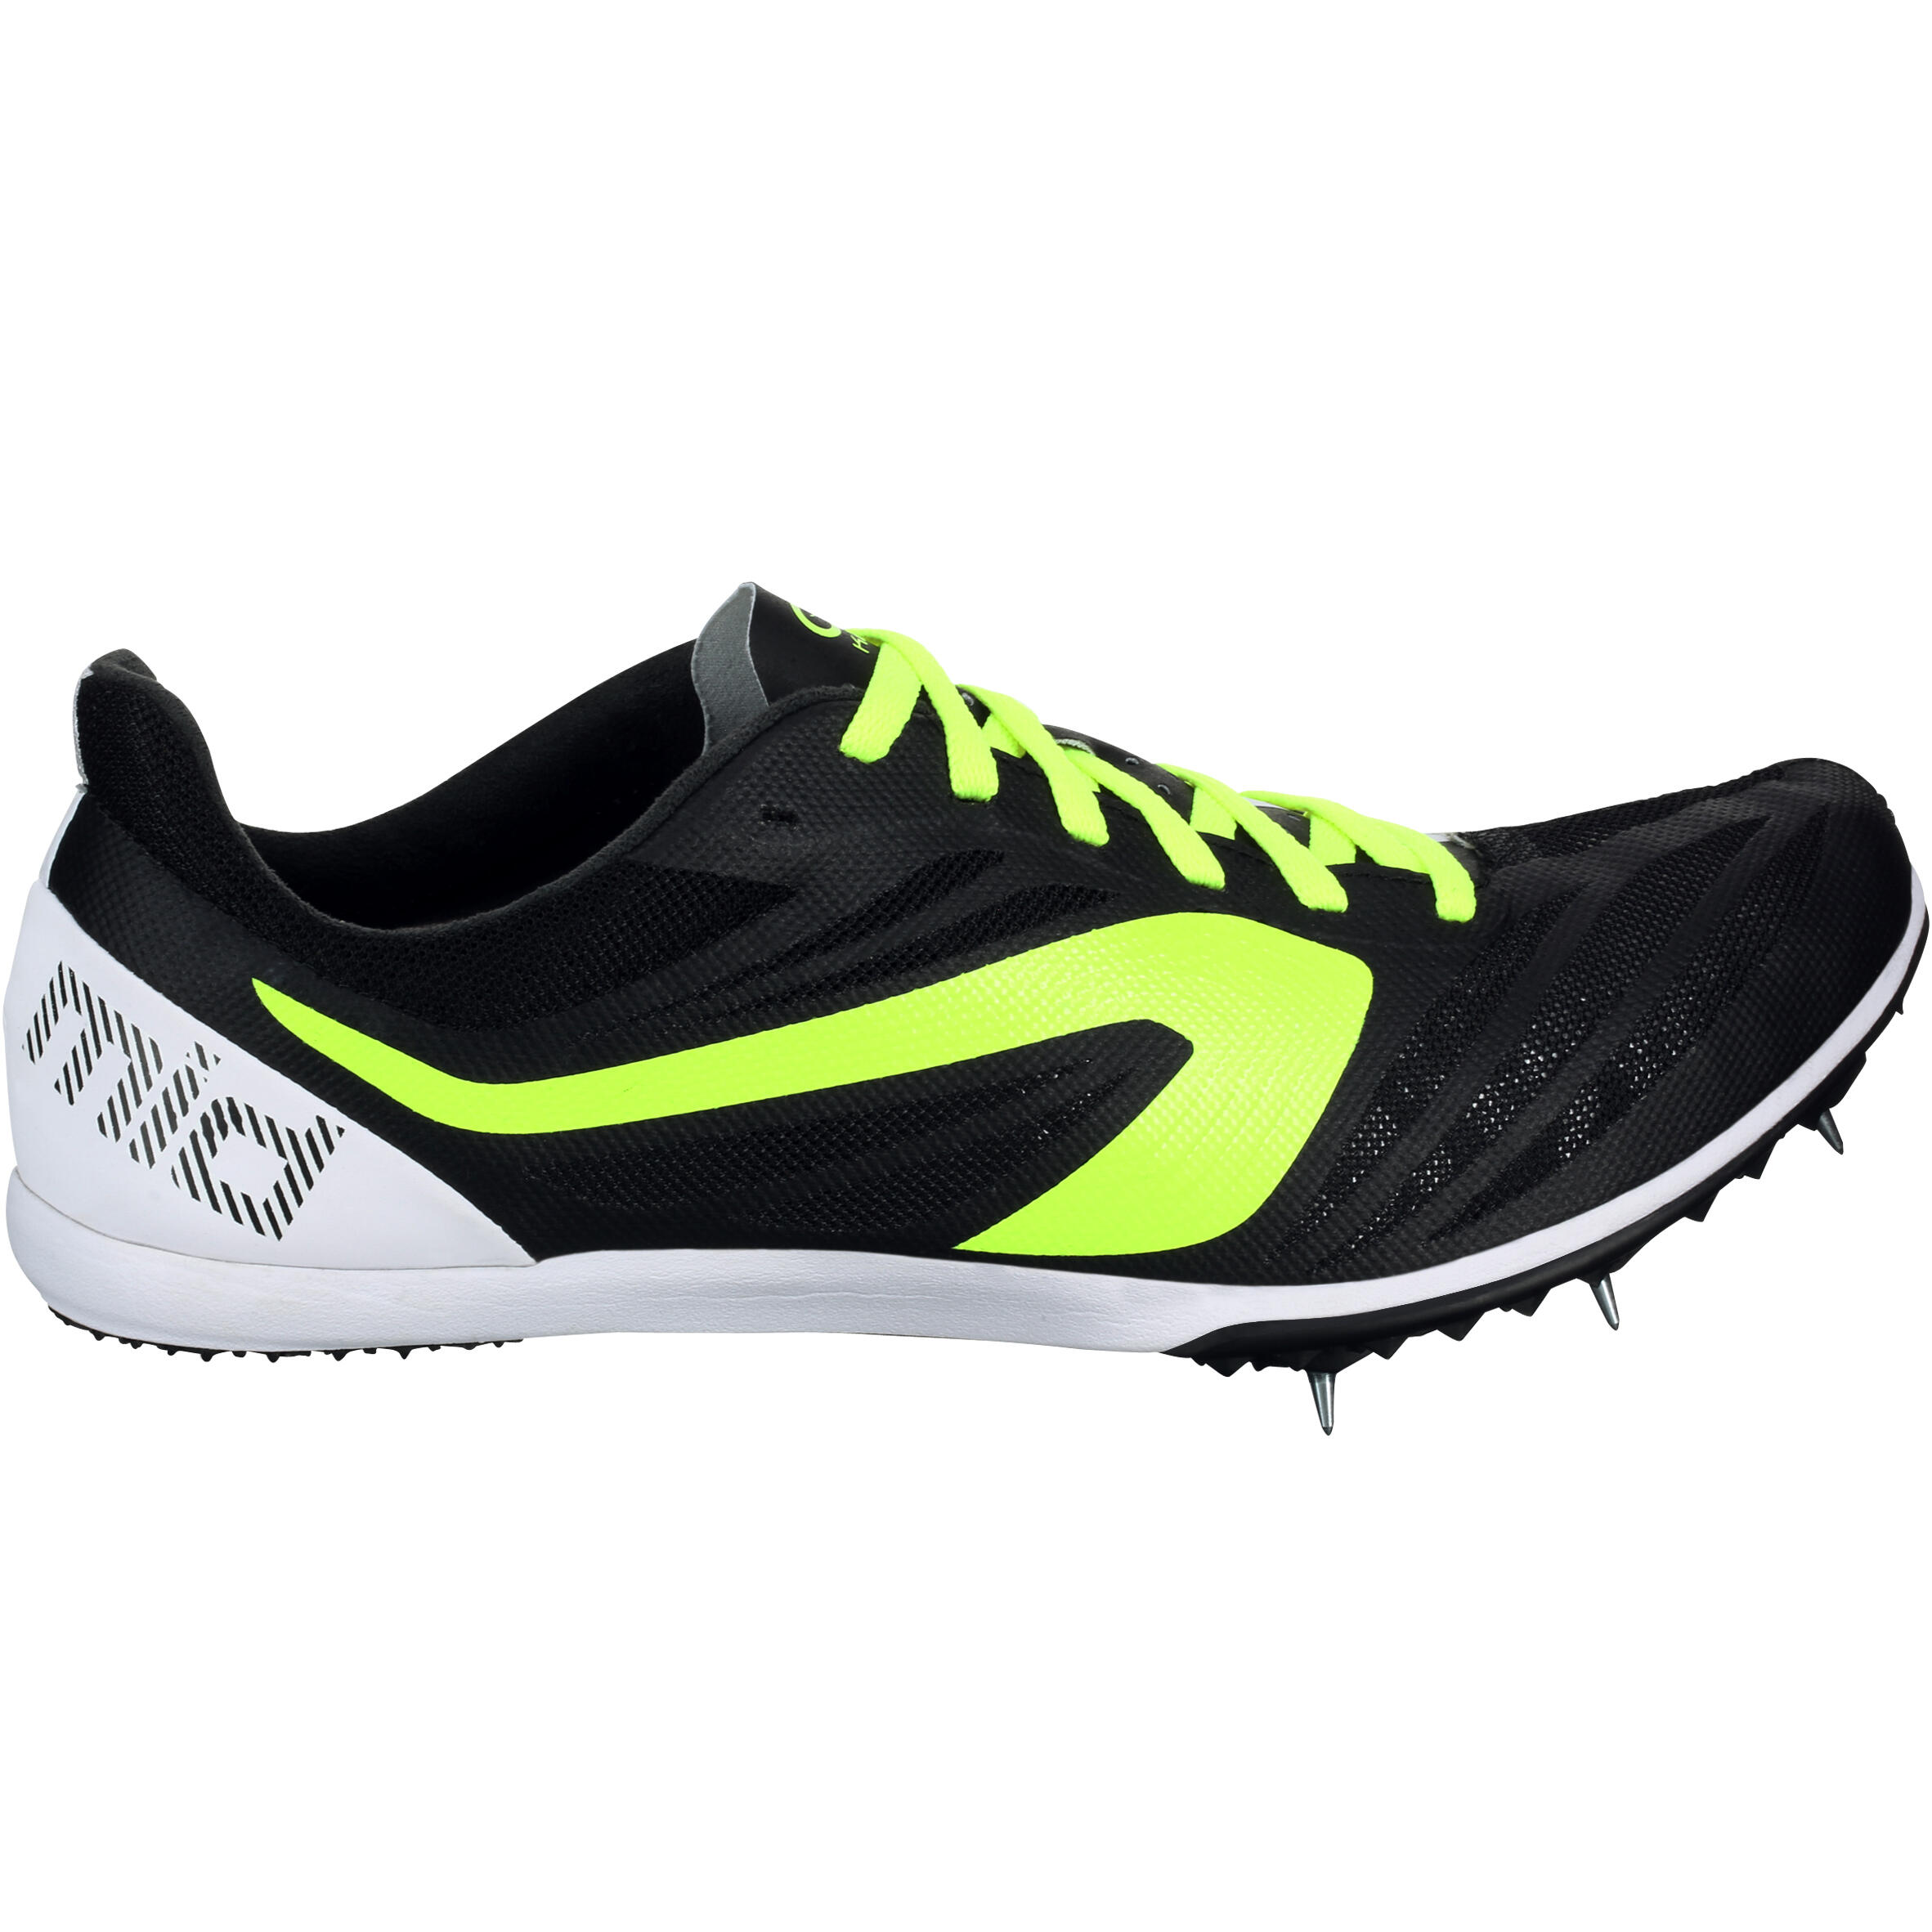 MIDDLE-DISTANCE RUNNING TRAINERS WITH 